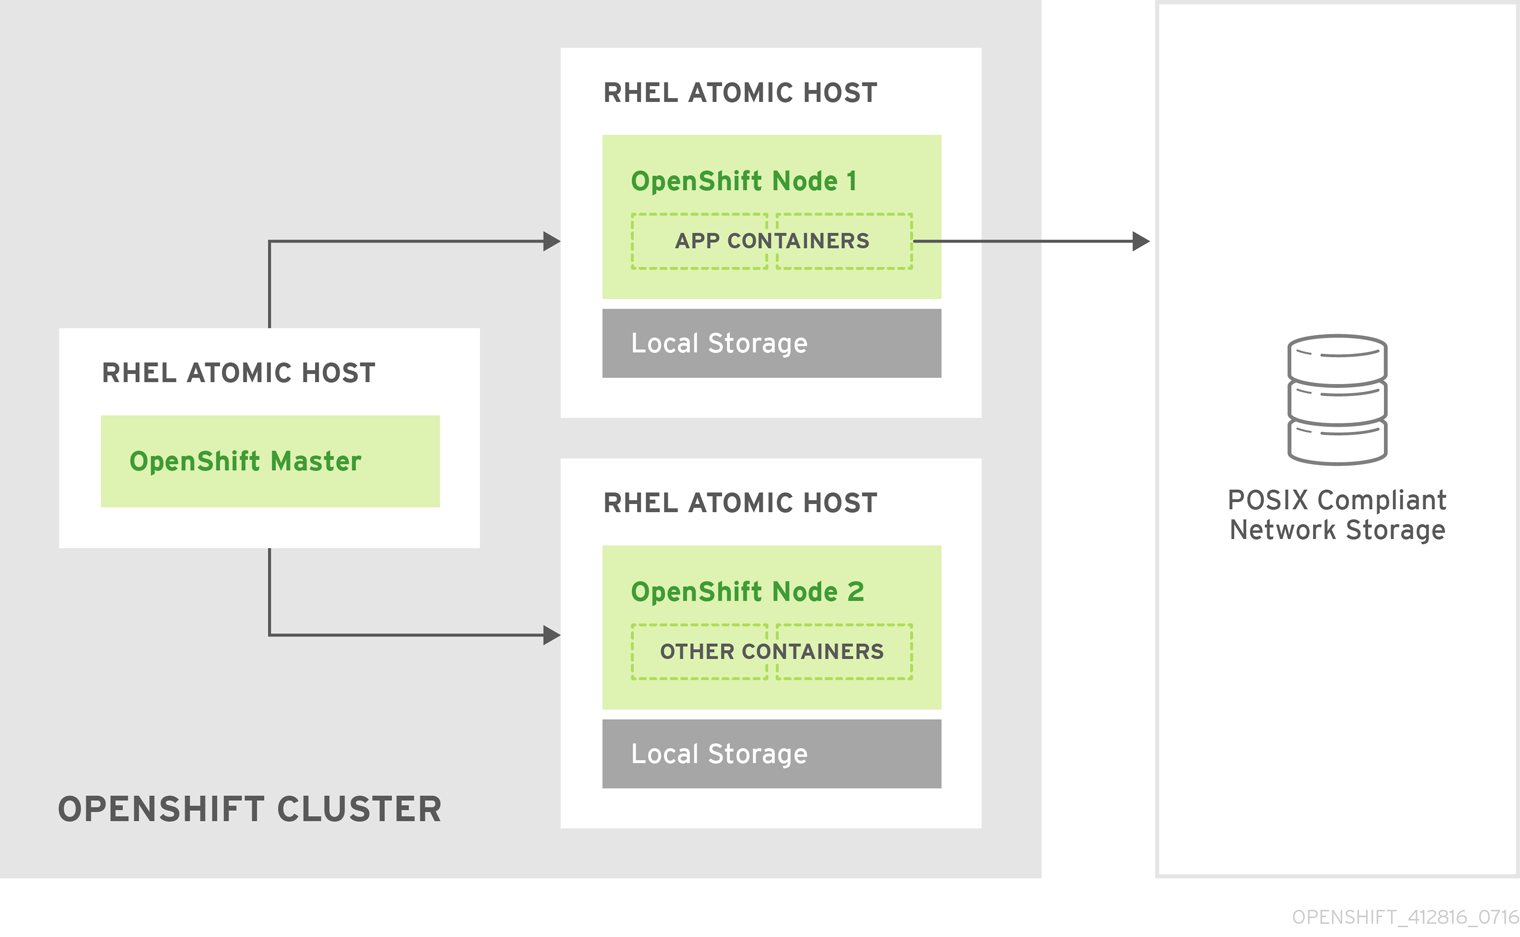 Architecture - Dedicated Red Hat Gluster Storage Cluster Using the OpenShift Enterprise Volume Plug-in